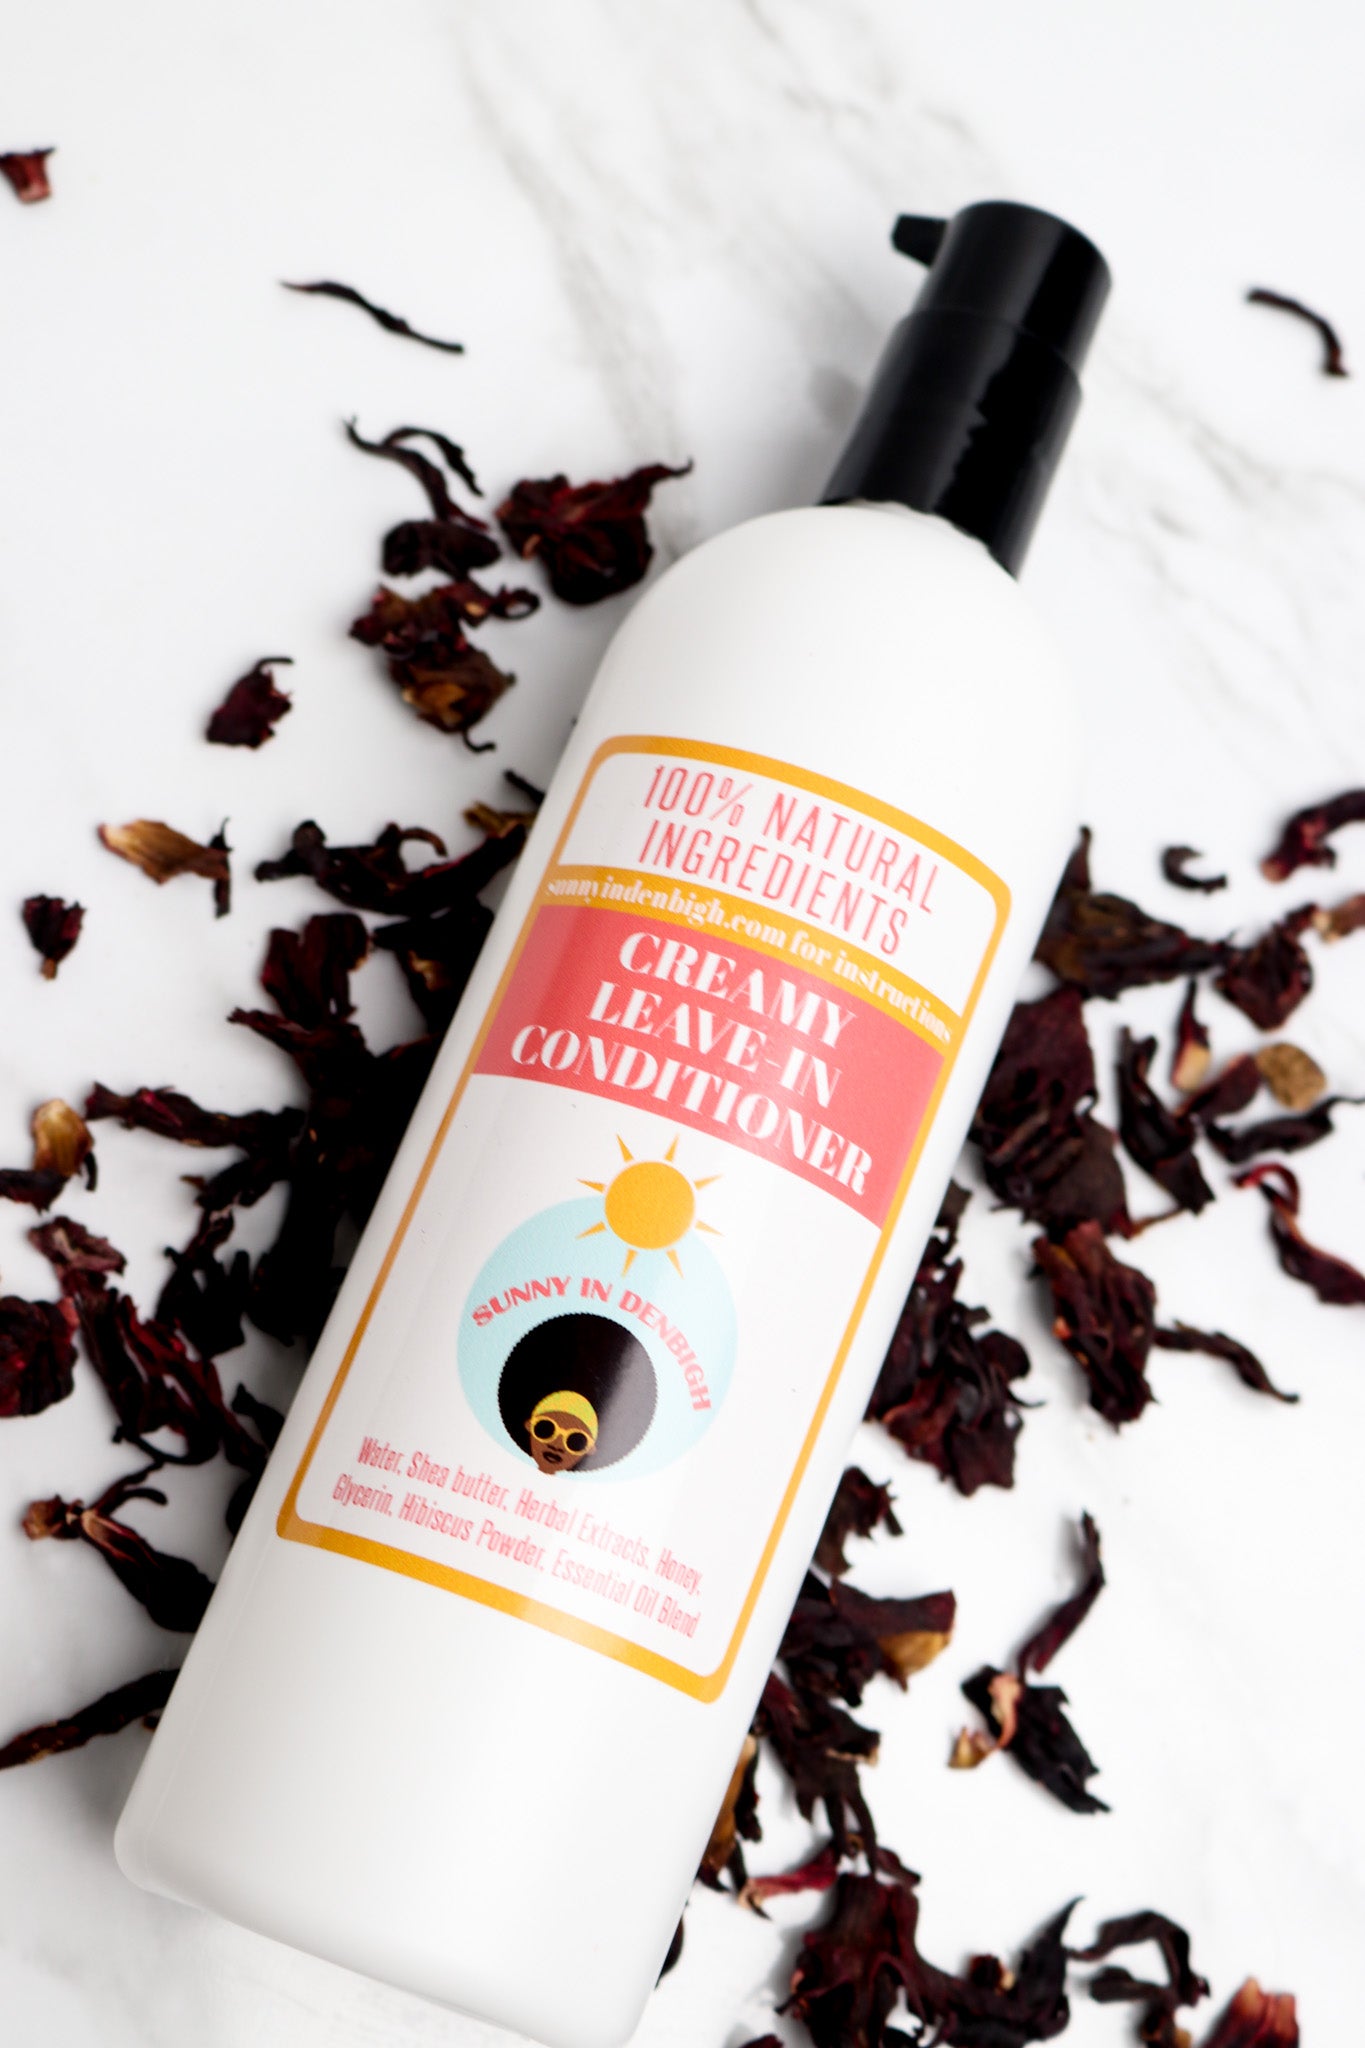 The Sunny in Denbigh Creamy Leave in Conditioner is heaven sent!It’s moisturizing, conditioning and will repair your strands. It’s ideal for growth, strength, preventing thinning, balding, premature greying, dandruff and itchy scalp.